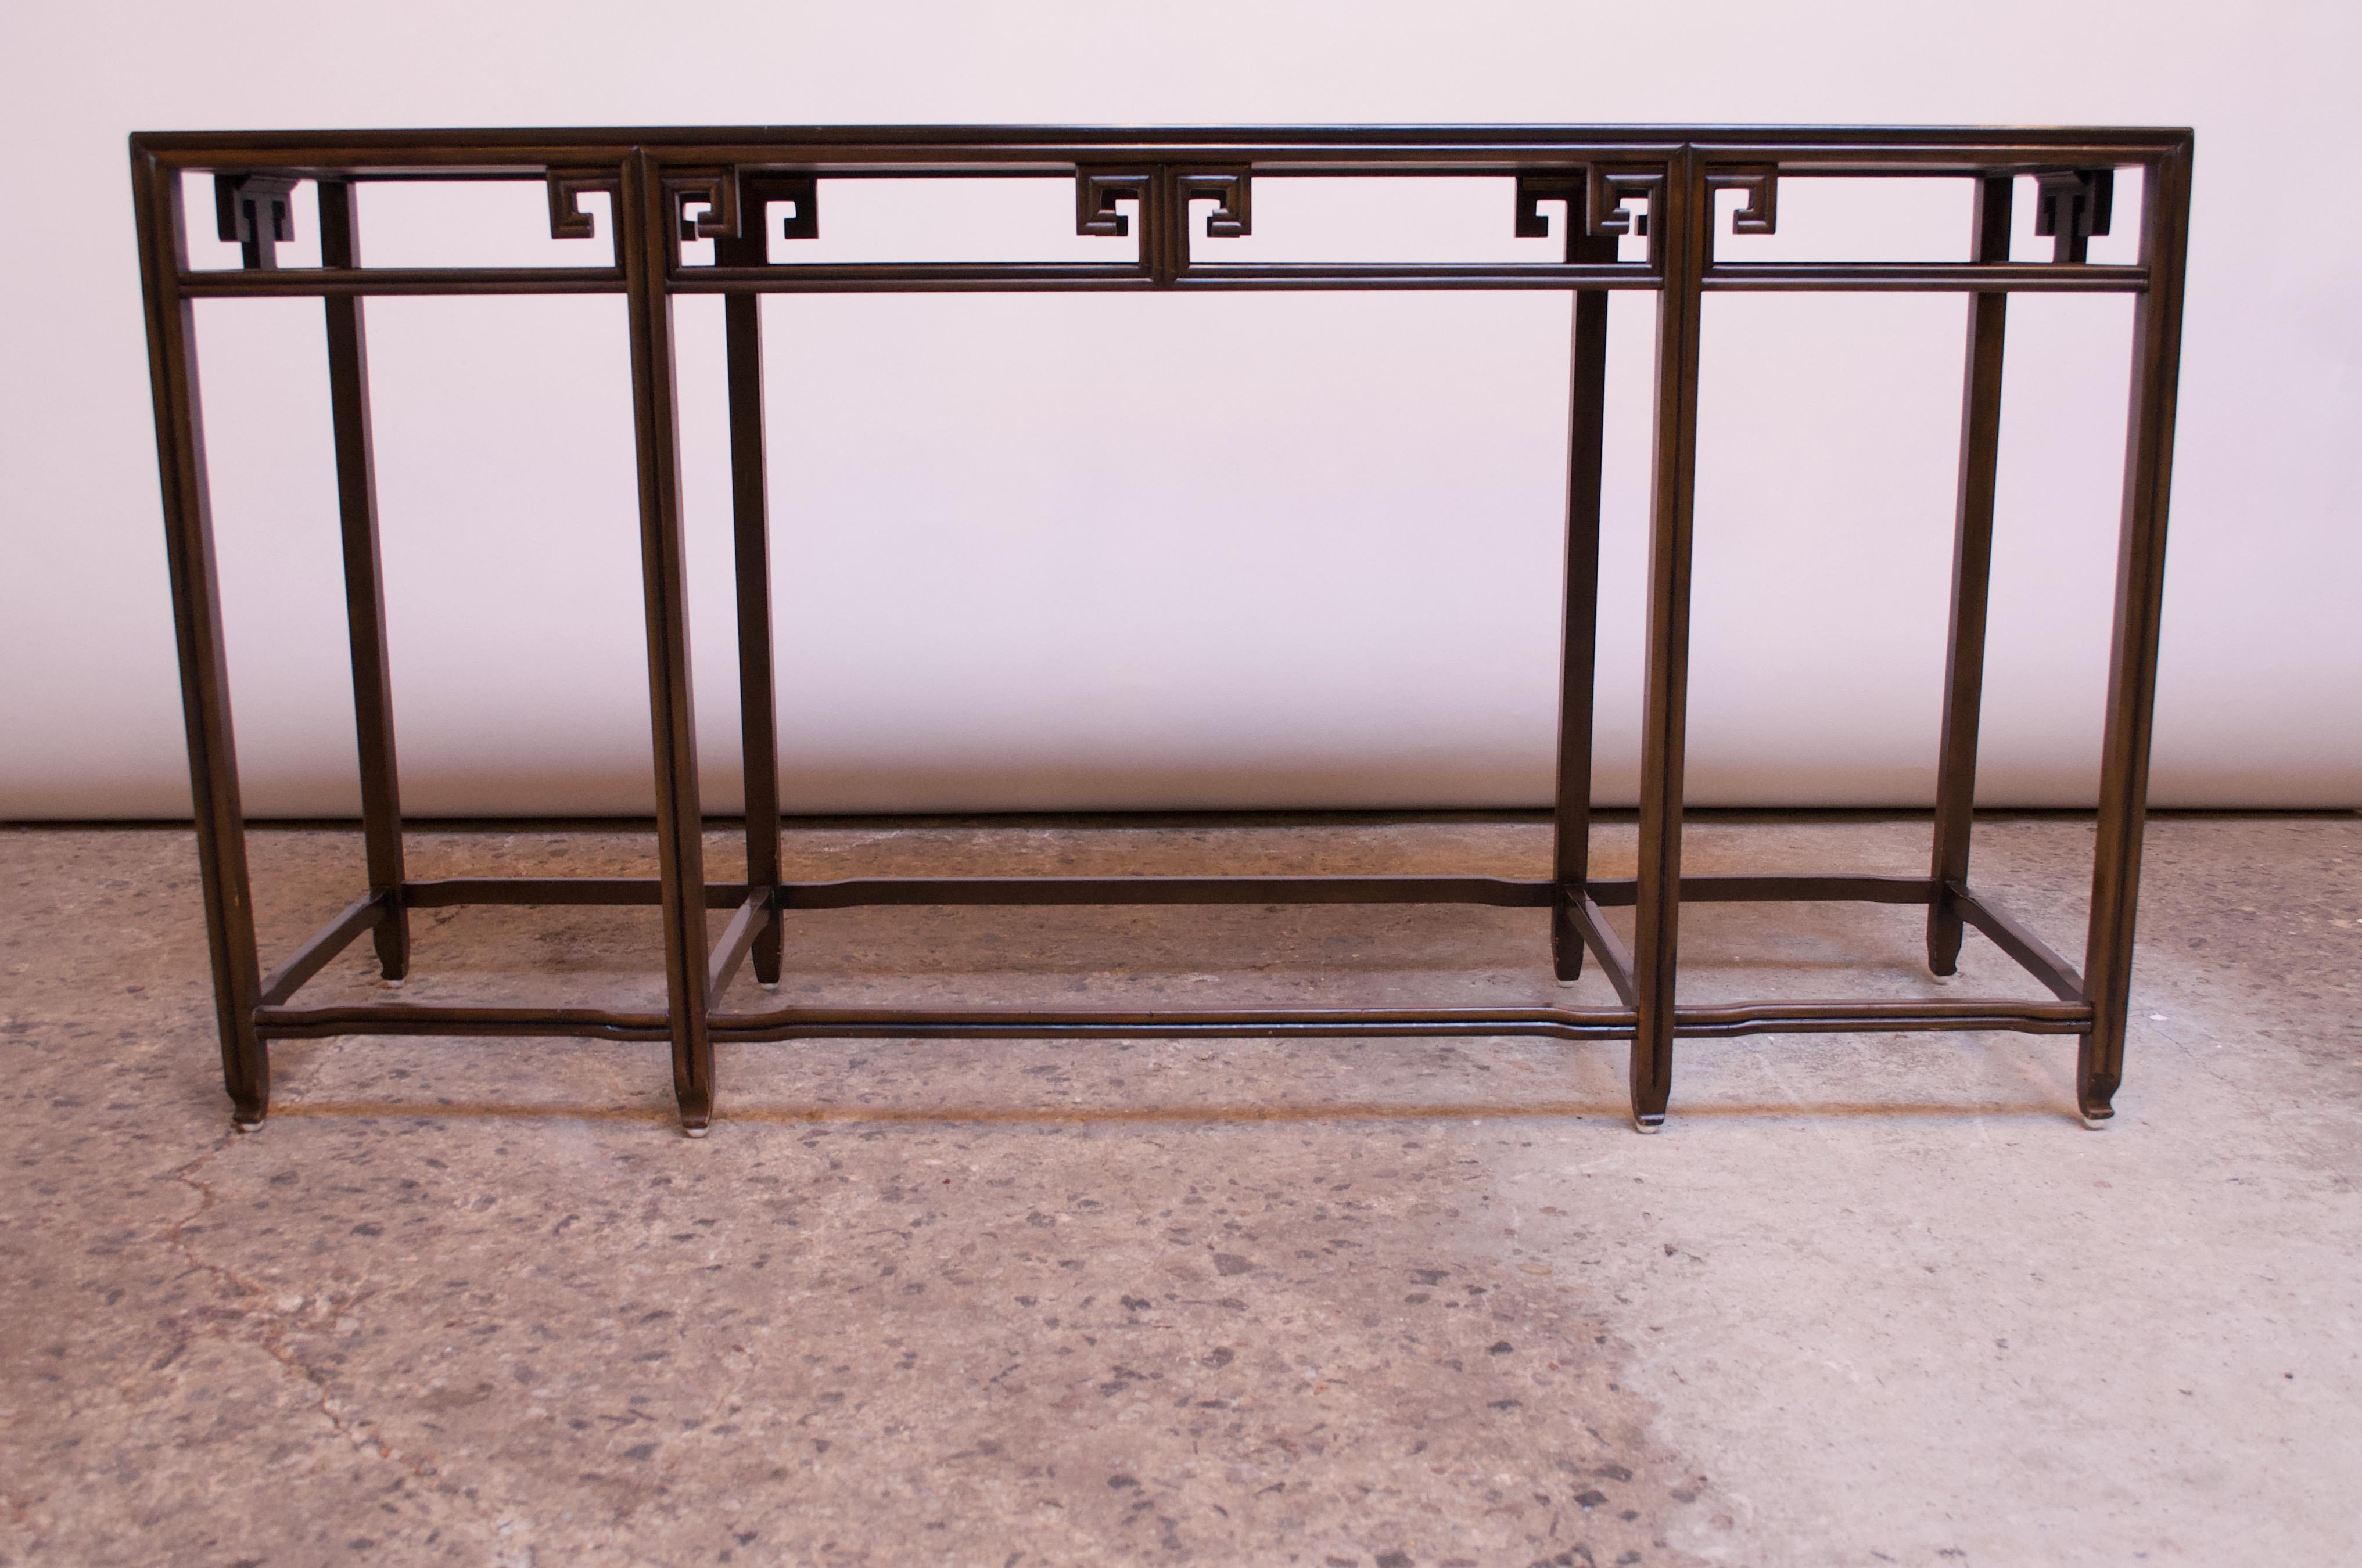 Elegant console or sofa table designed in the 1960s by Michael Taylor for Baker's 